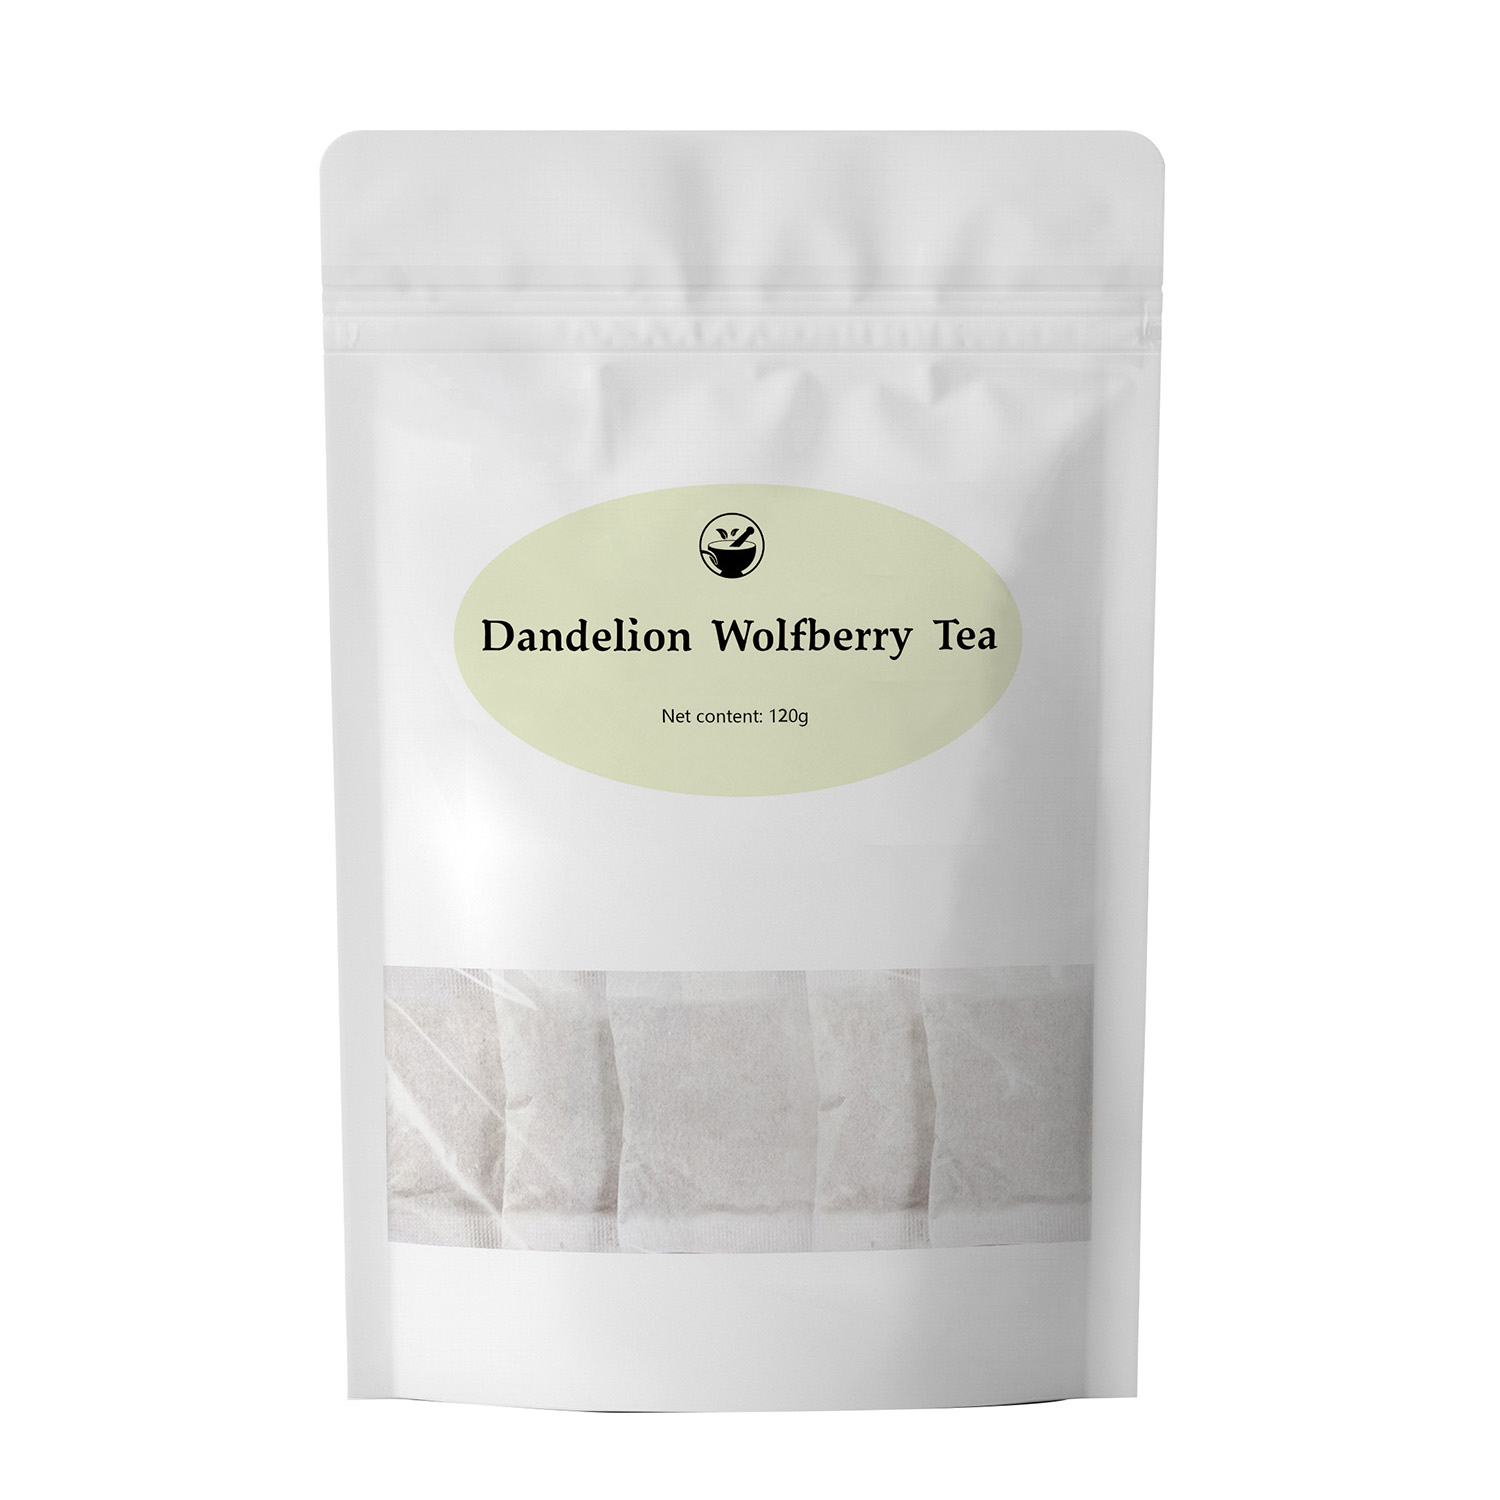 Dandelion Wolfberry Tea, Natural Tea with Dandelion,Wolfberry, Cassia 